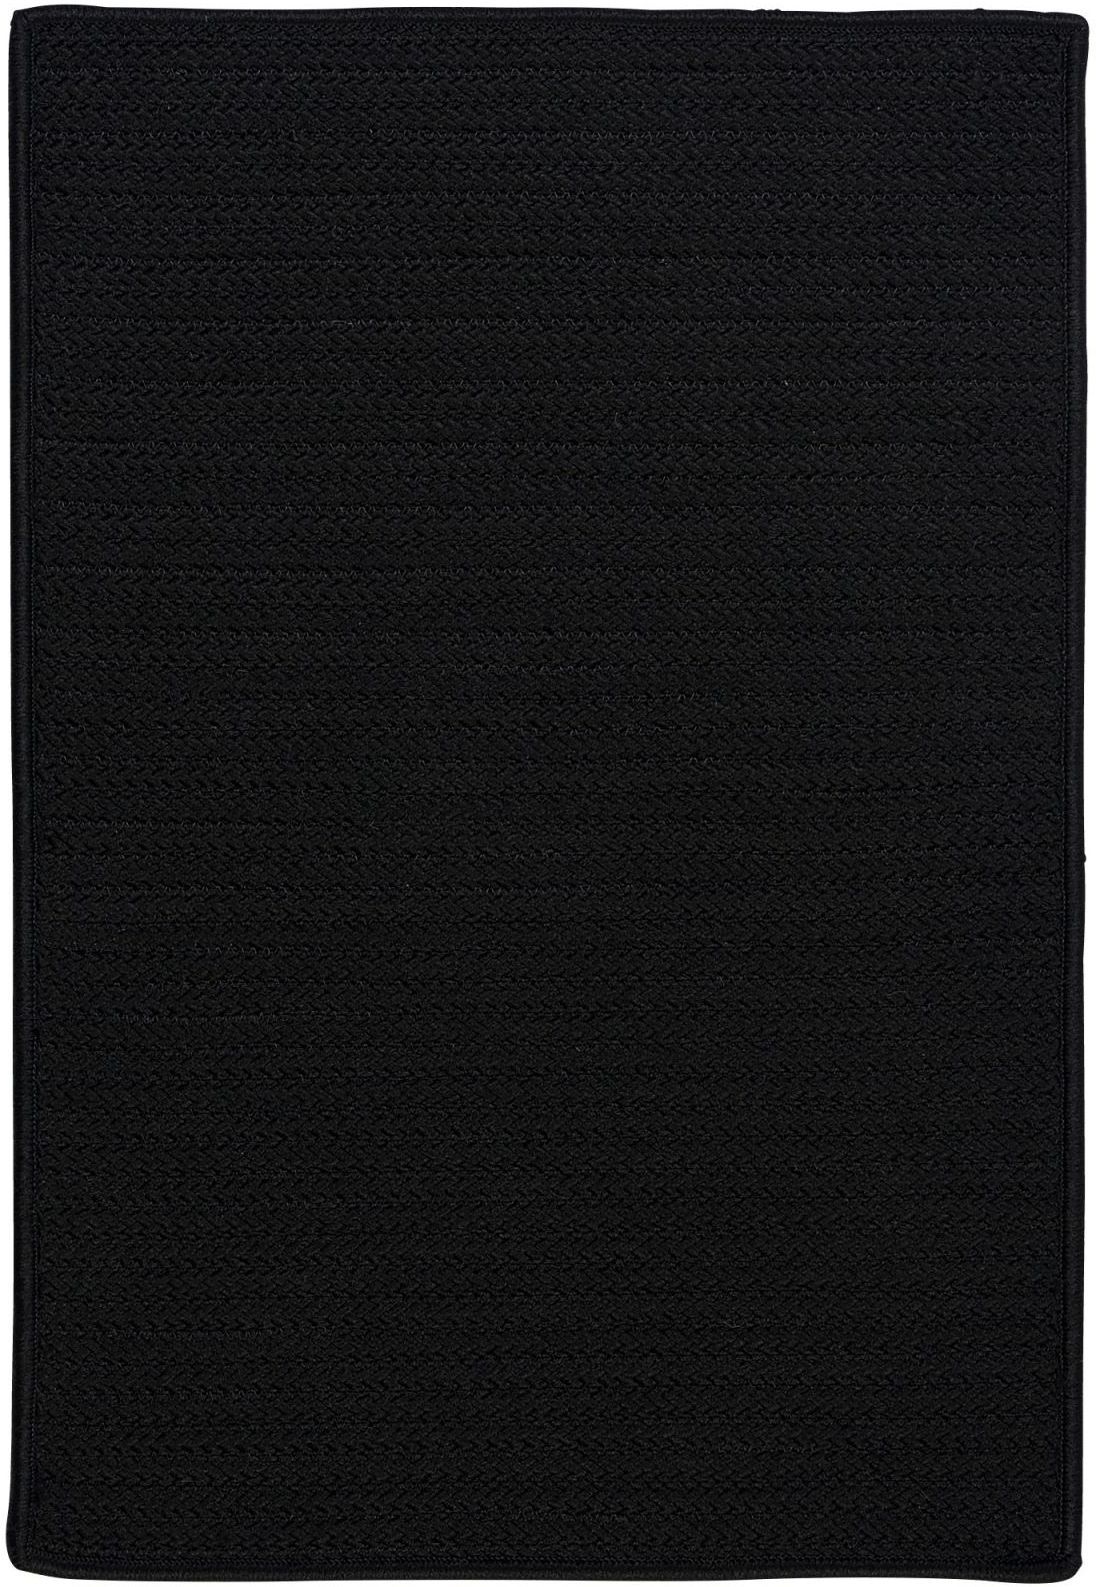 Colonial Mills Simply Home Solid H833 Pale Banana Area Rug